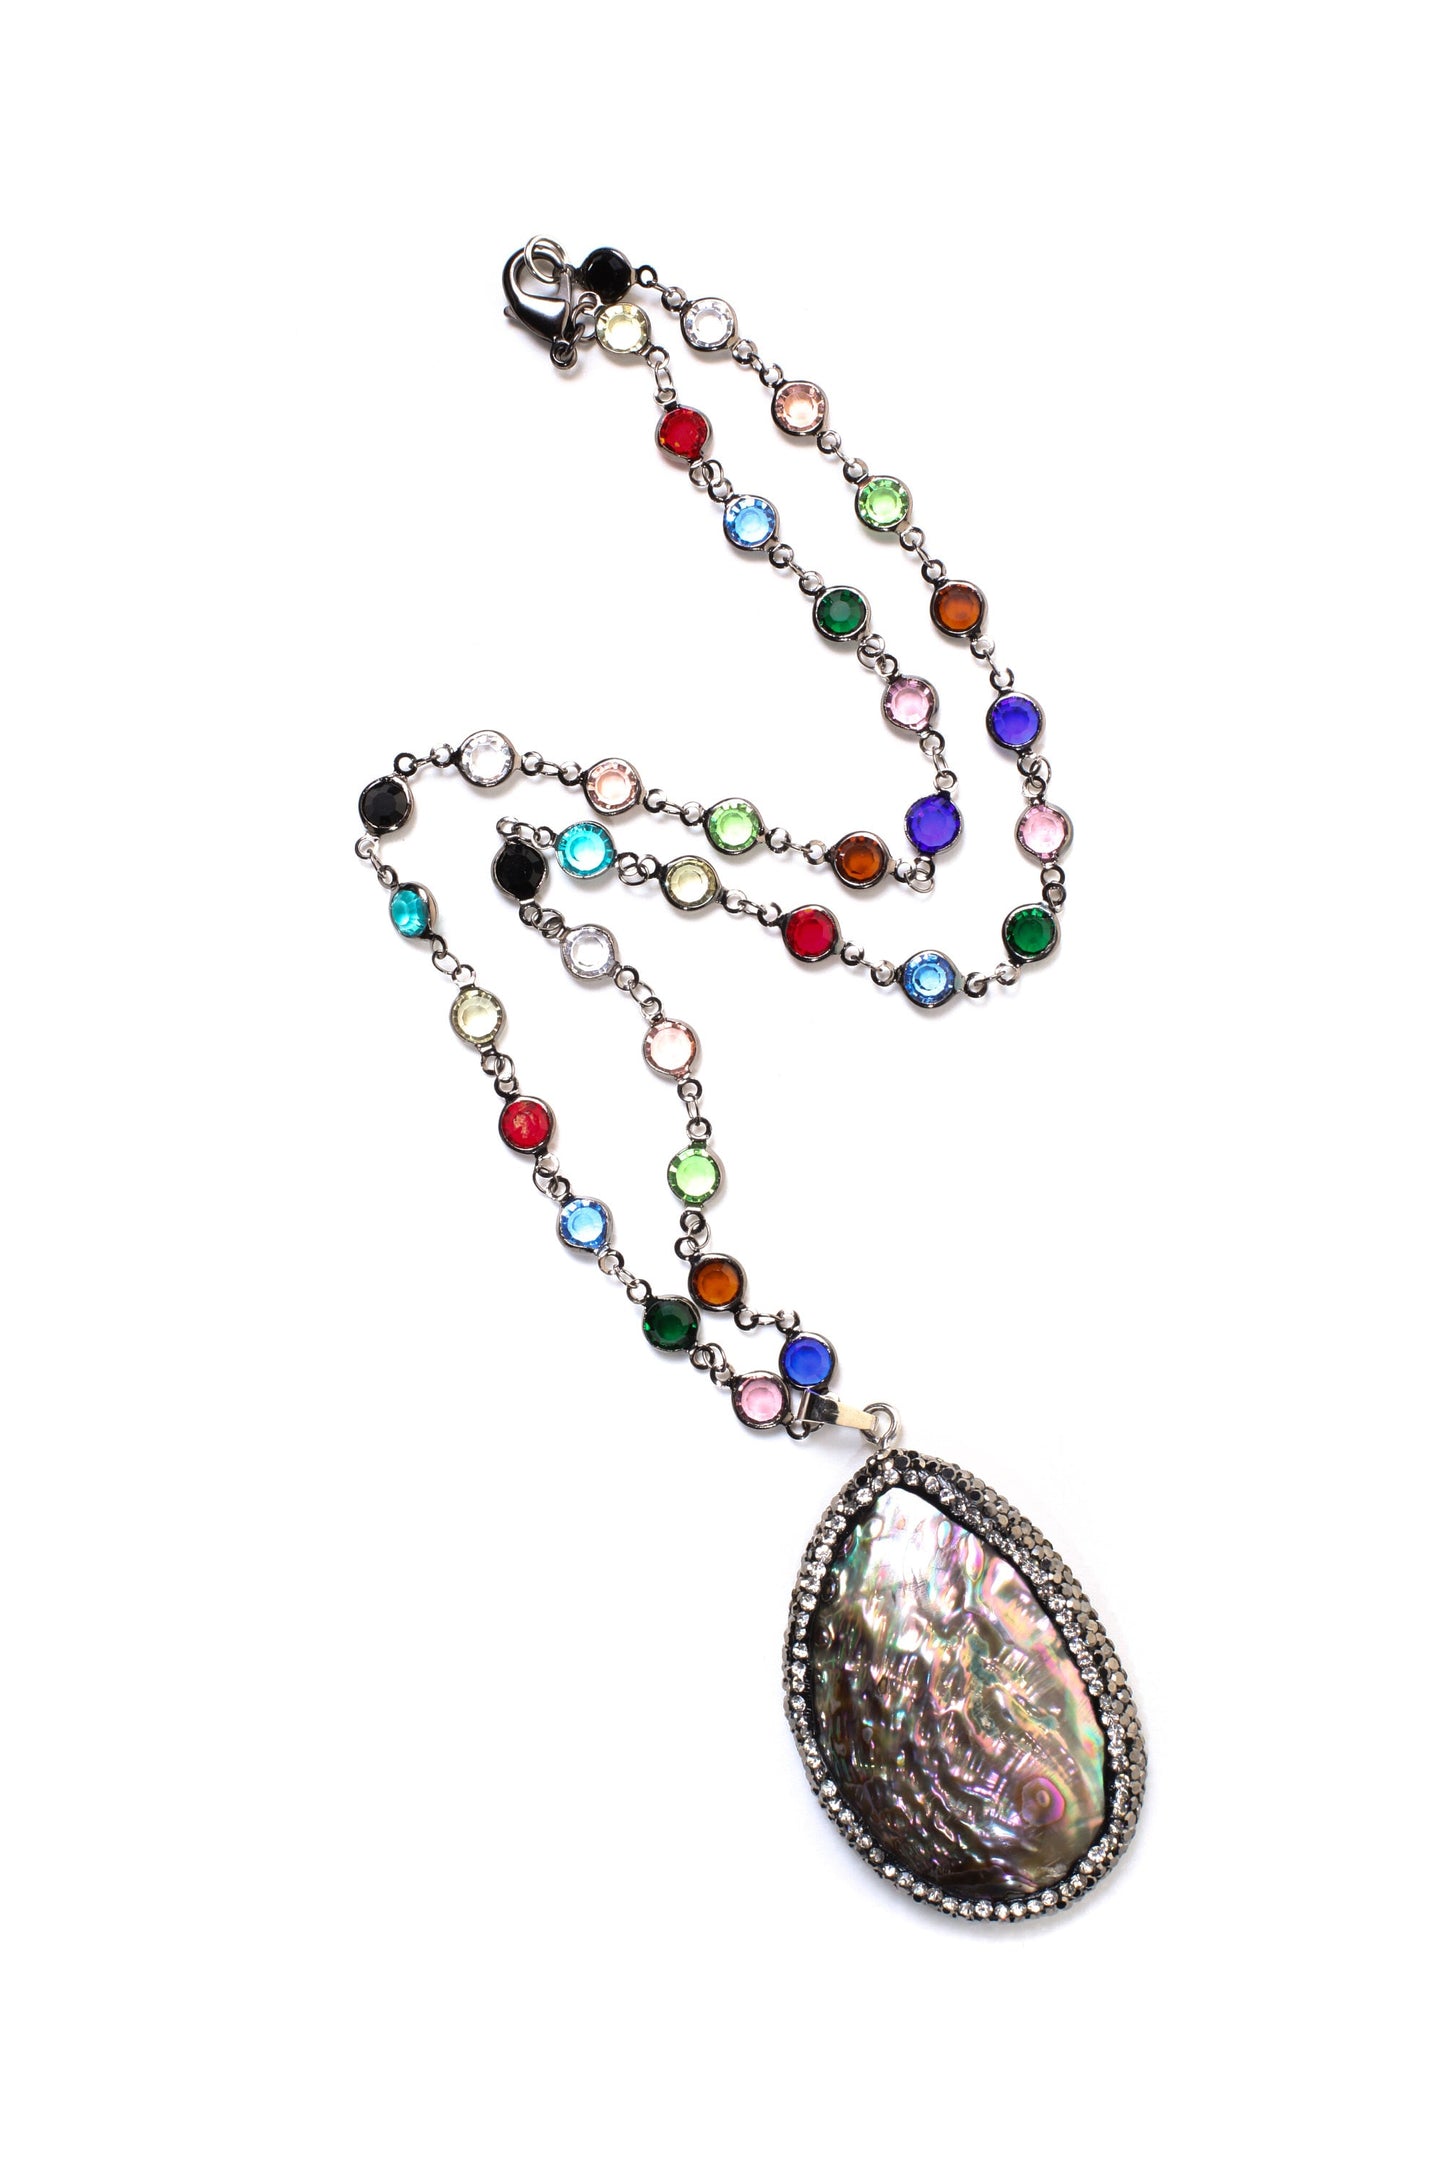 Abalone CZ Pave Marcasite Style 36x53mm Pendant Multi Crystal Quartz Beaded Bezel Chain in Oxidized Silver Chain 21" Necklace